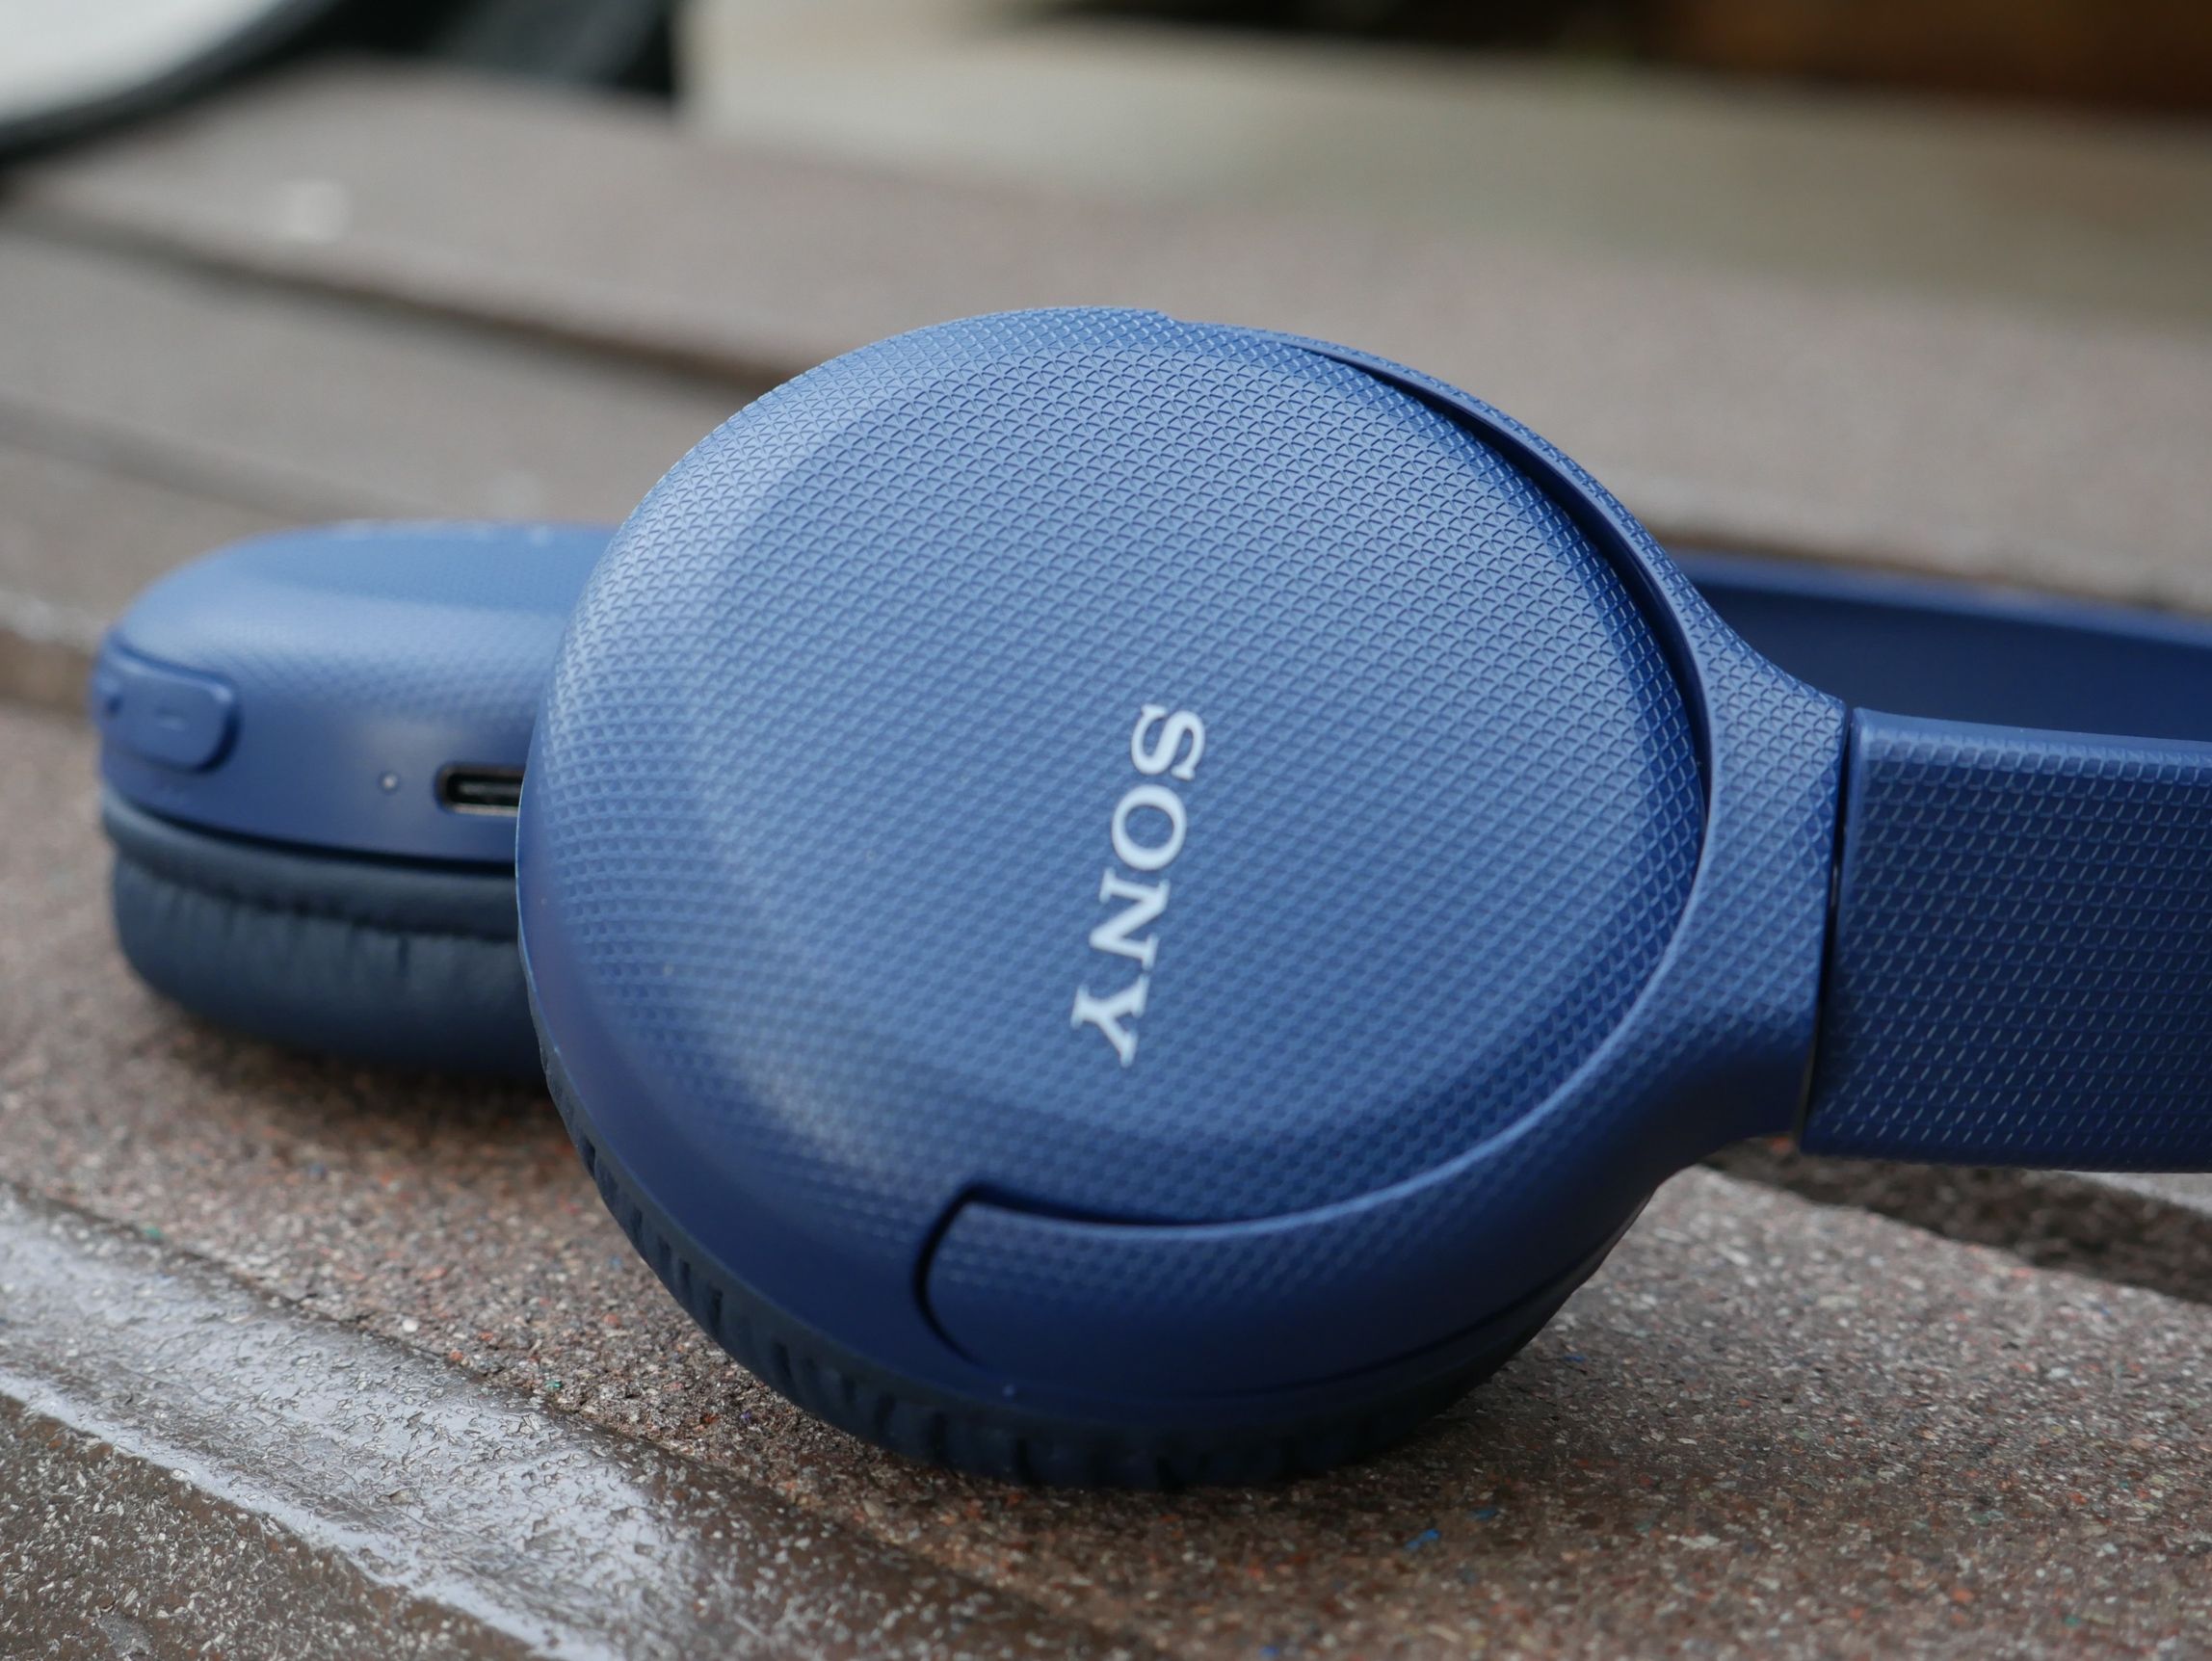 Sony WH-CH510 Review: Budget Pick with Big Battery & Balanced Audio -  Dignited